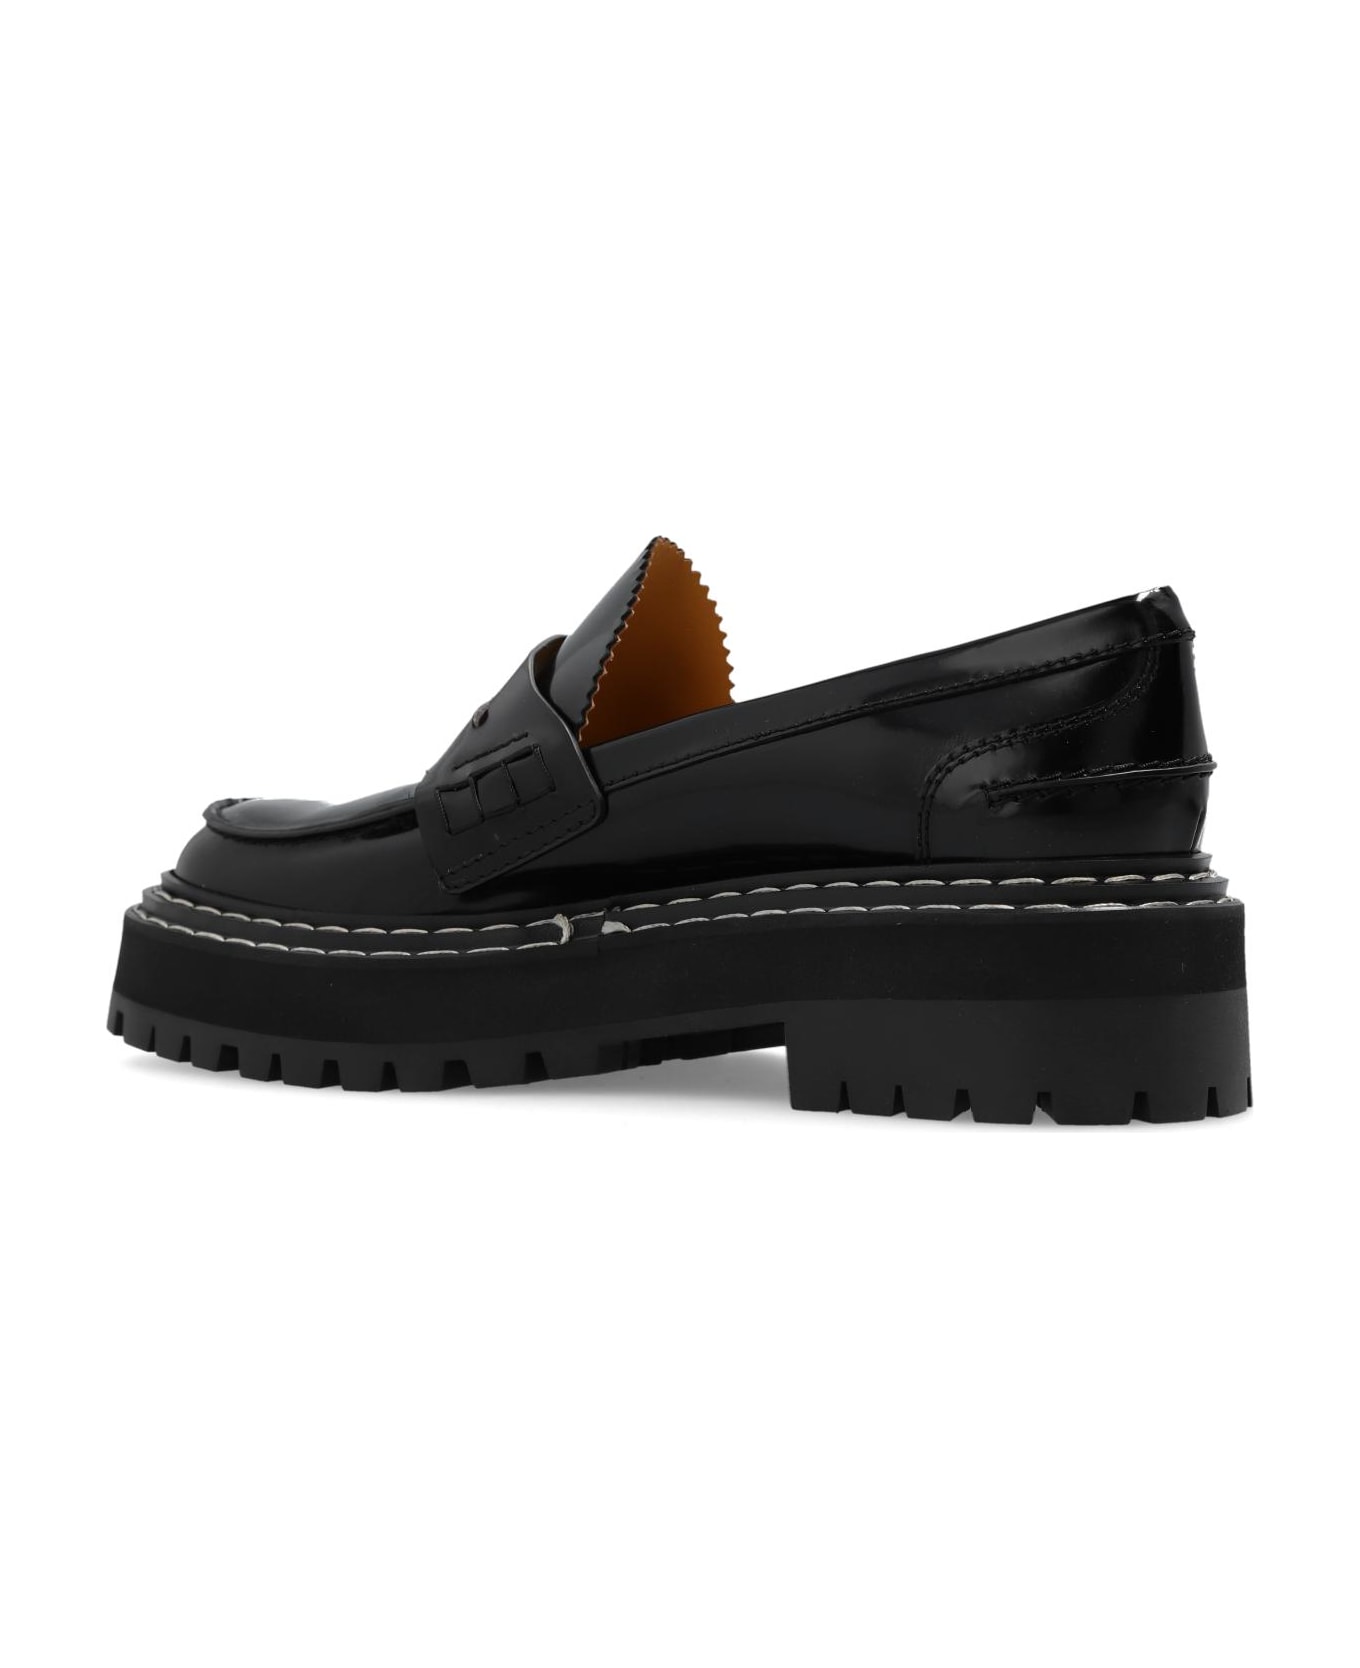 Proenza Schouler Leather Loafers - Black